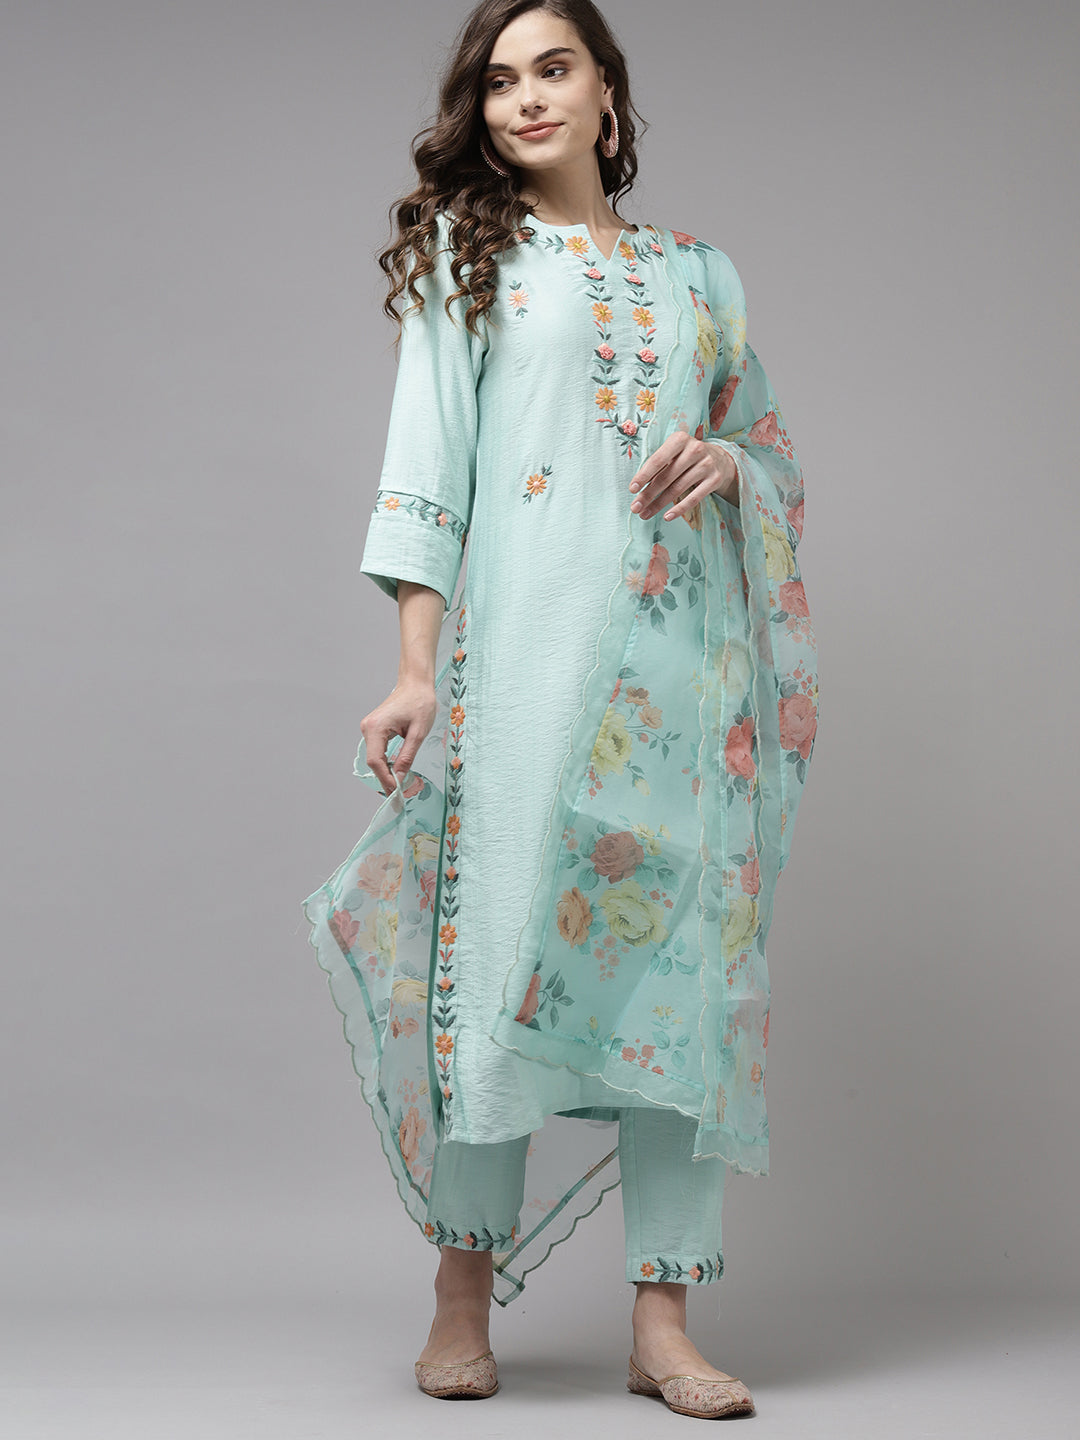 Kurti and Sharara for pooja outfit | Fashion clothes women, Fashion,  Partywear